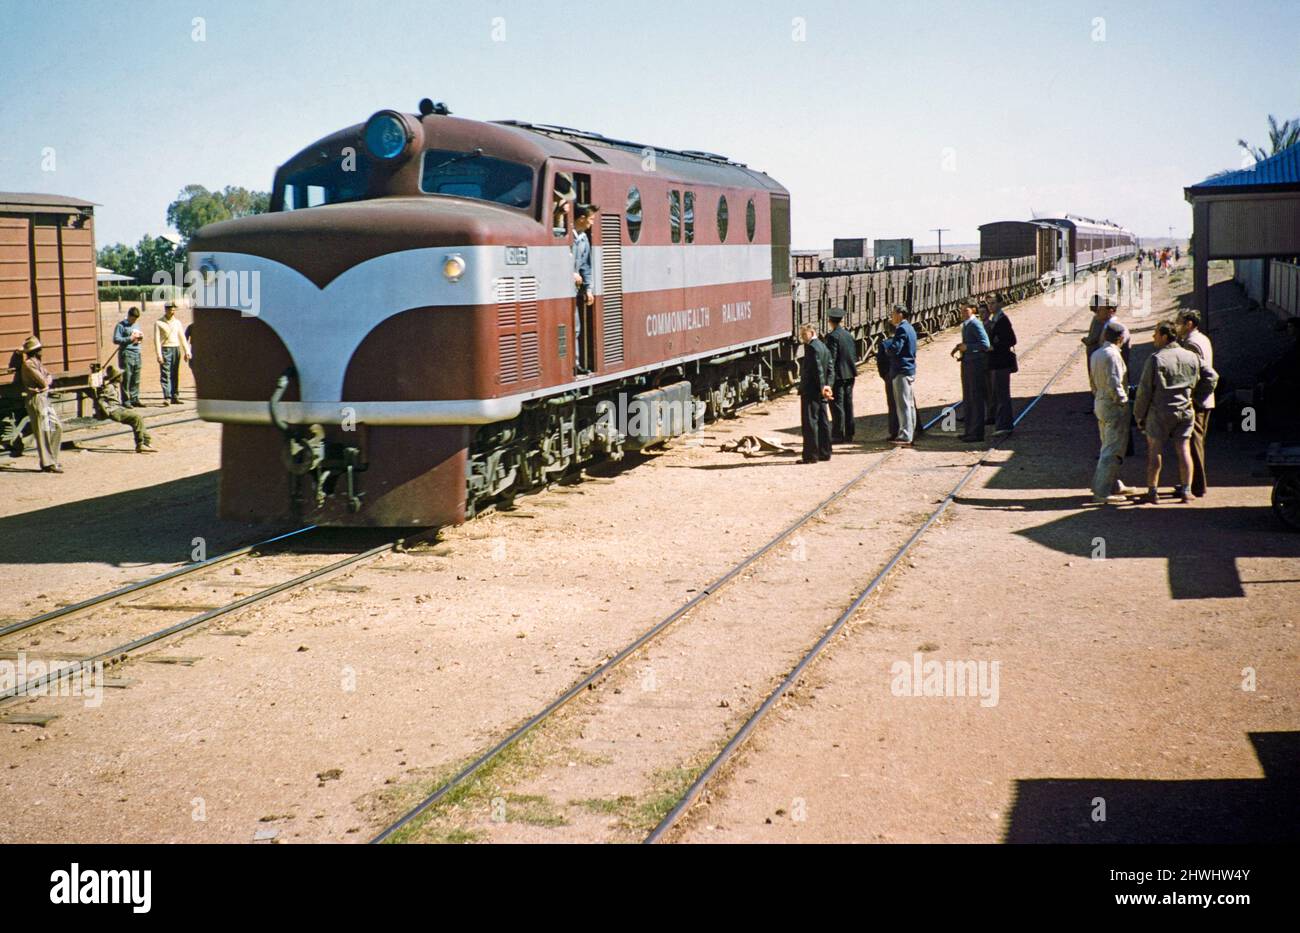 Commonwealth Railways diesel locomotive engine train with freight wagons  and passenger carriages, Alice Springs, Northern Territory, Australia 1956  Stock Photo - Alamy